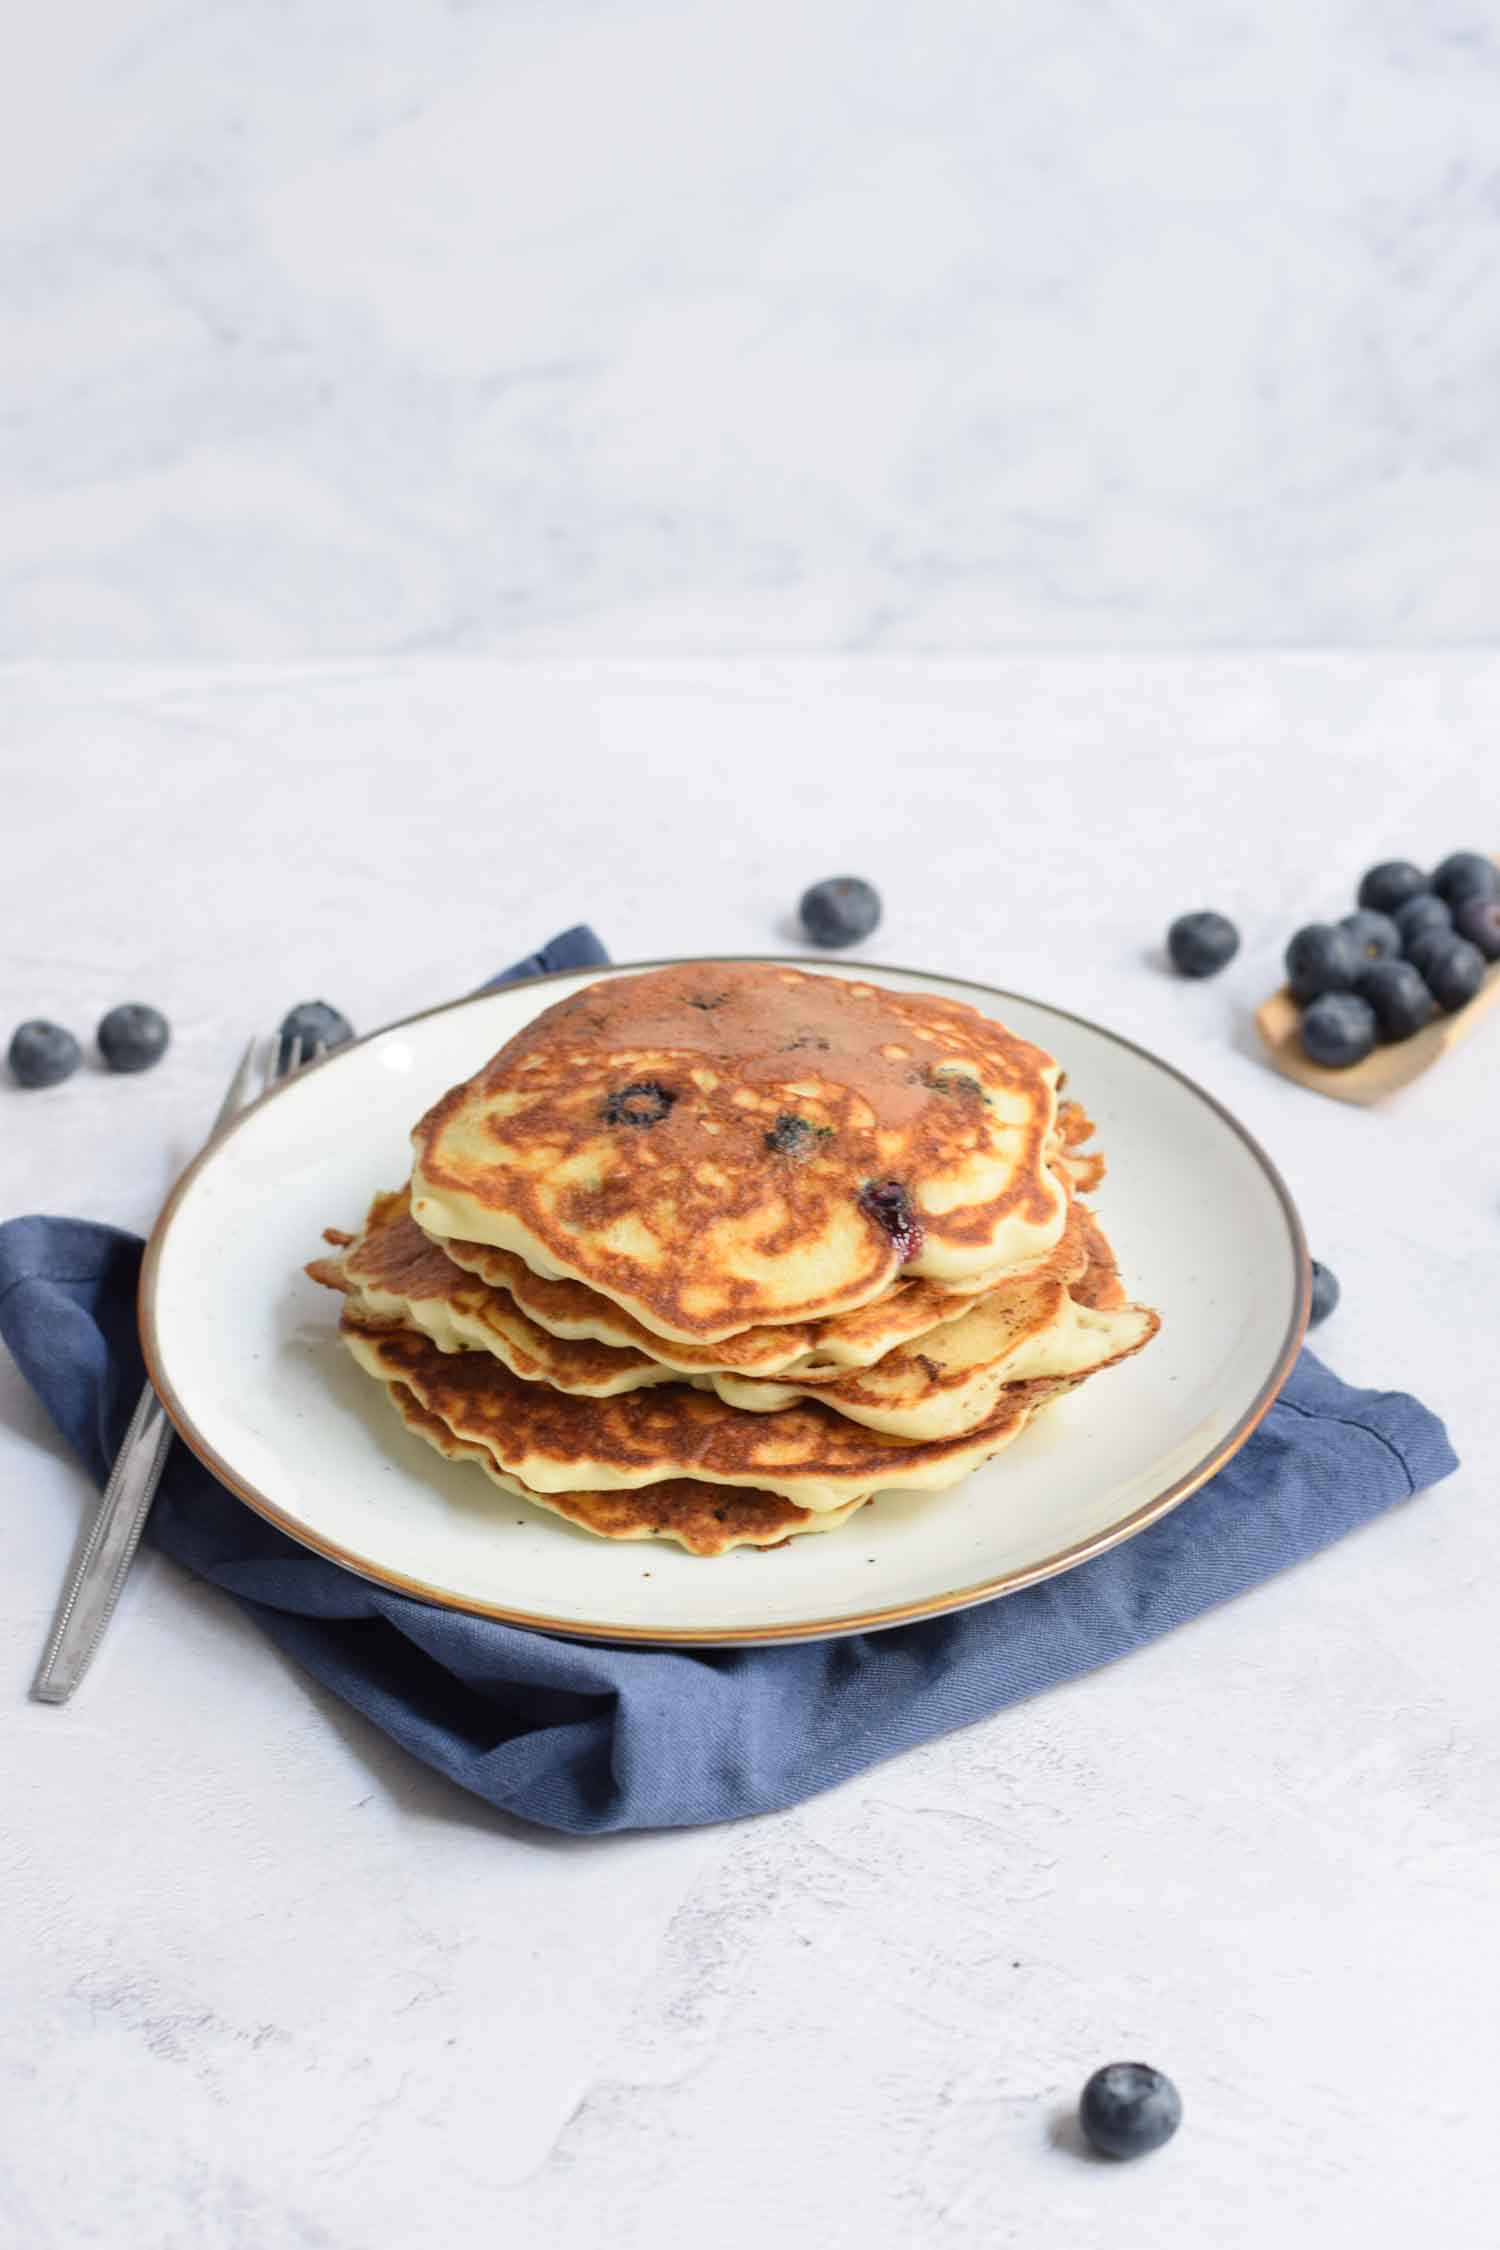 A stack of gluten-free American pancakes with blueberries on a plate